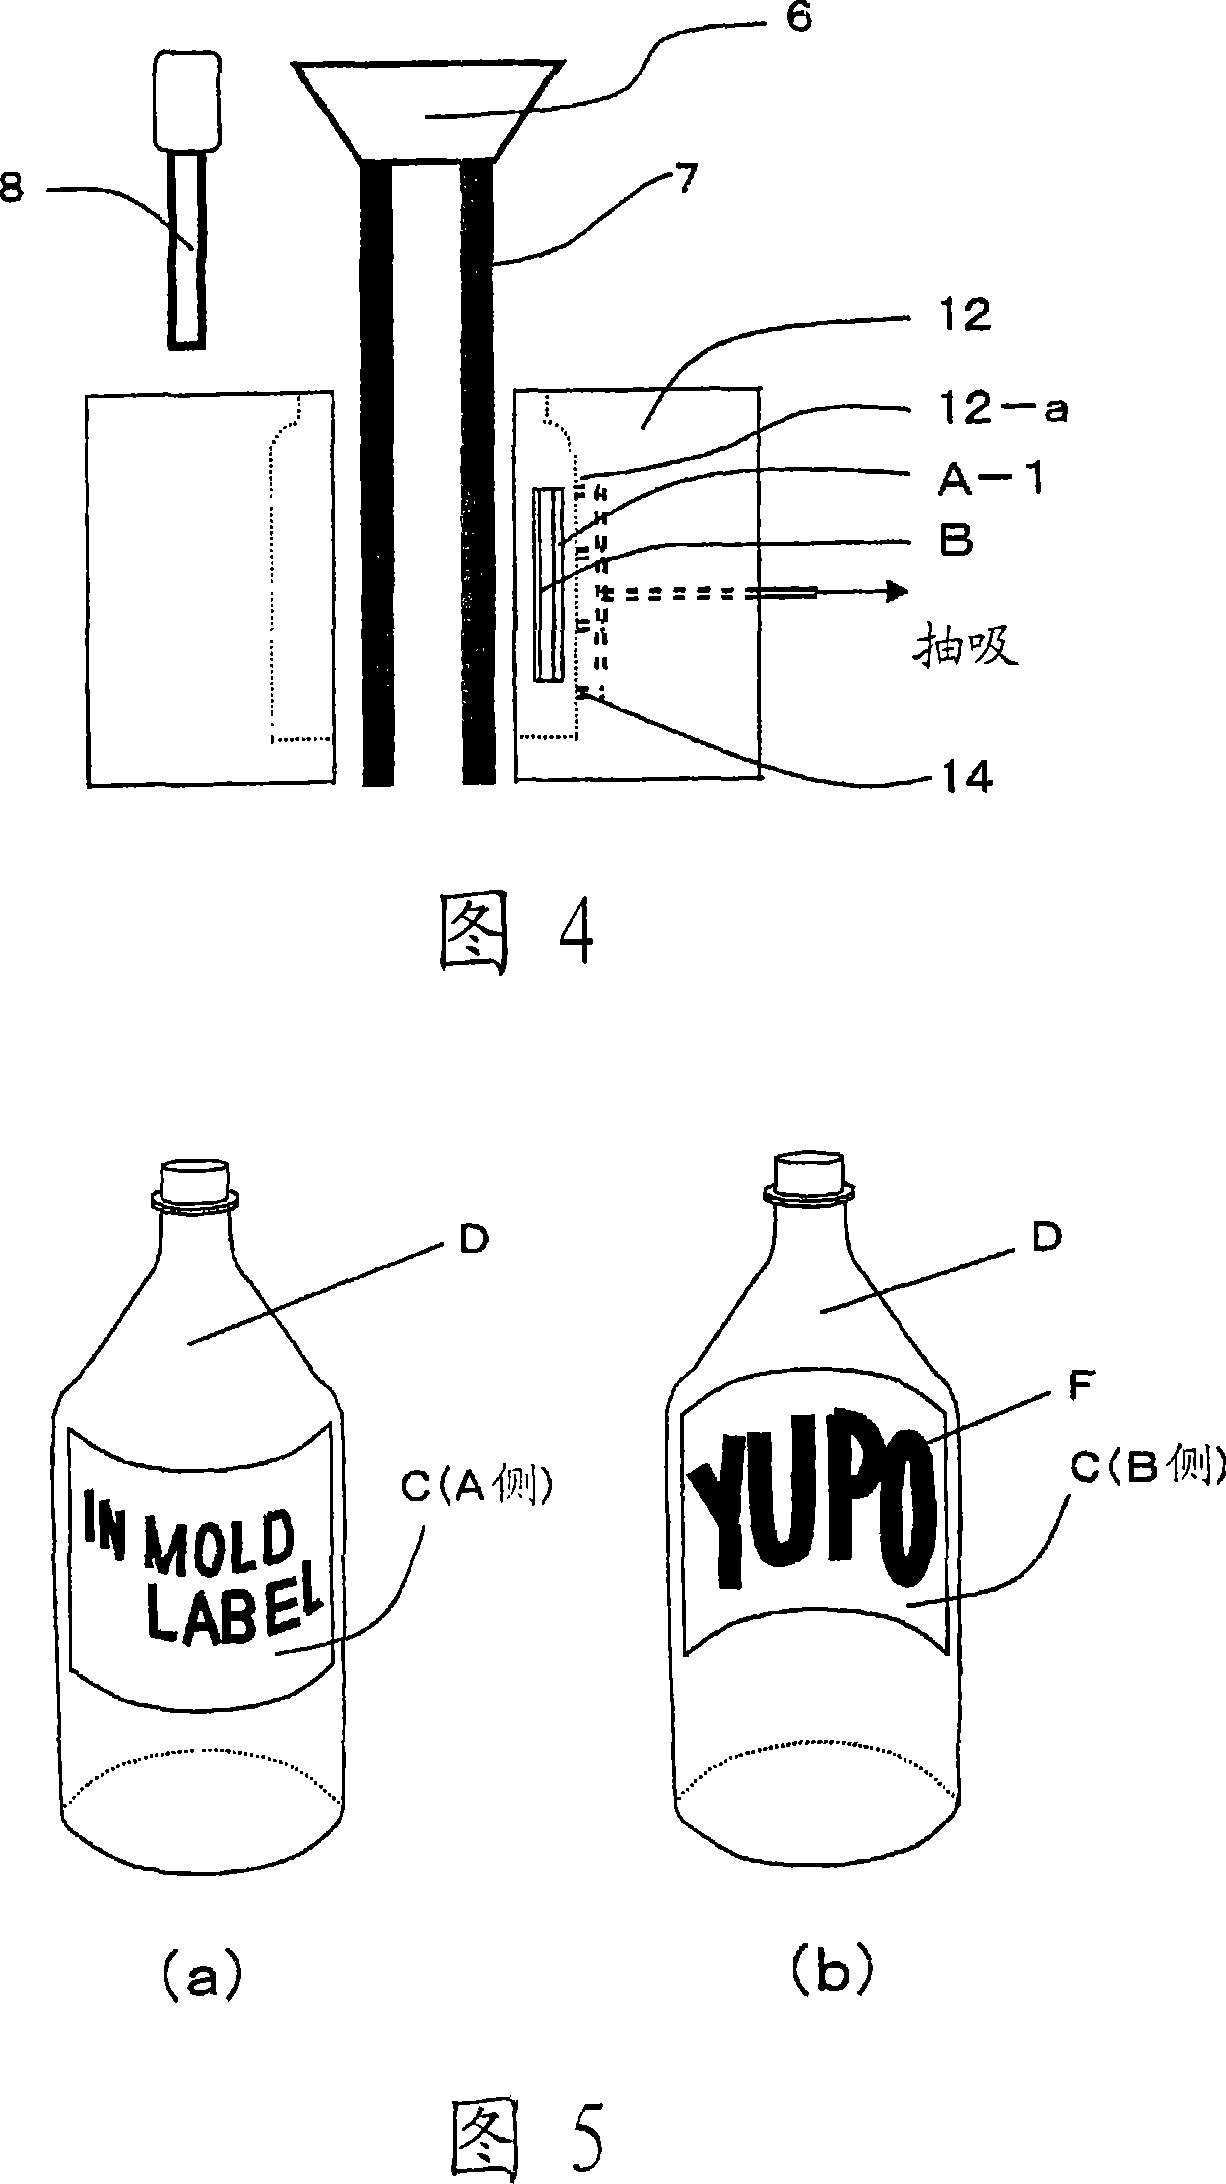 Labeled molded object obtained by in-mold labeling and in-mold label